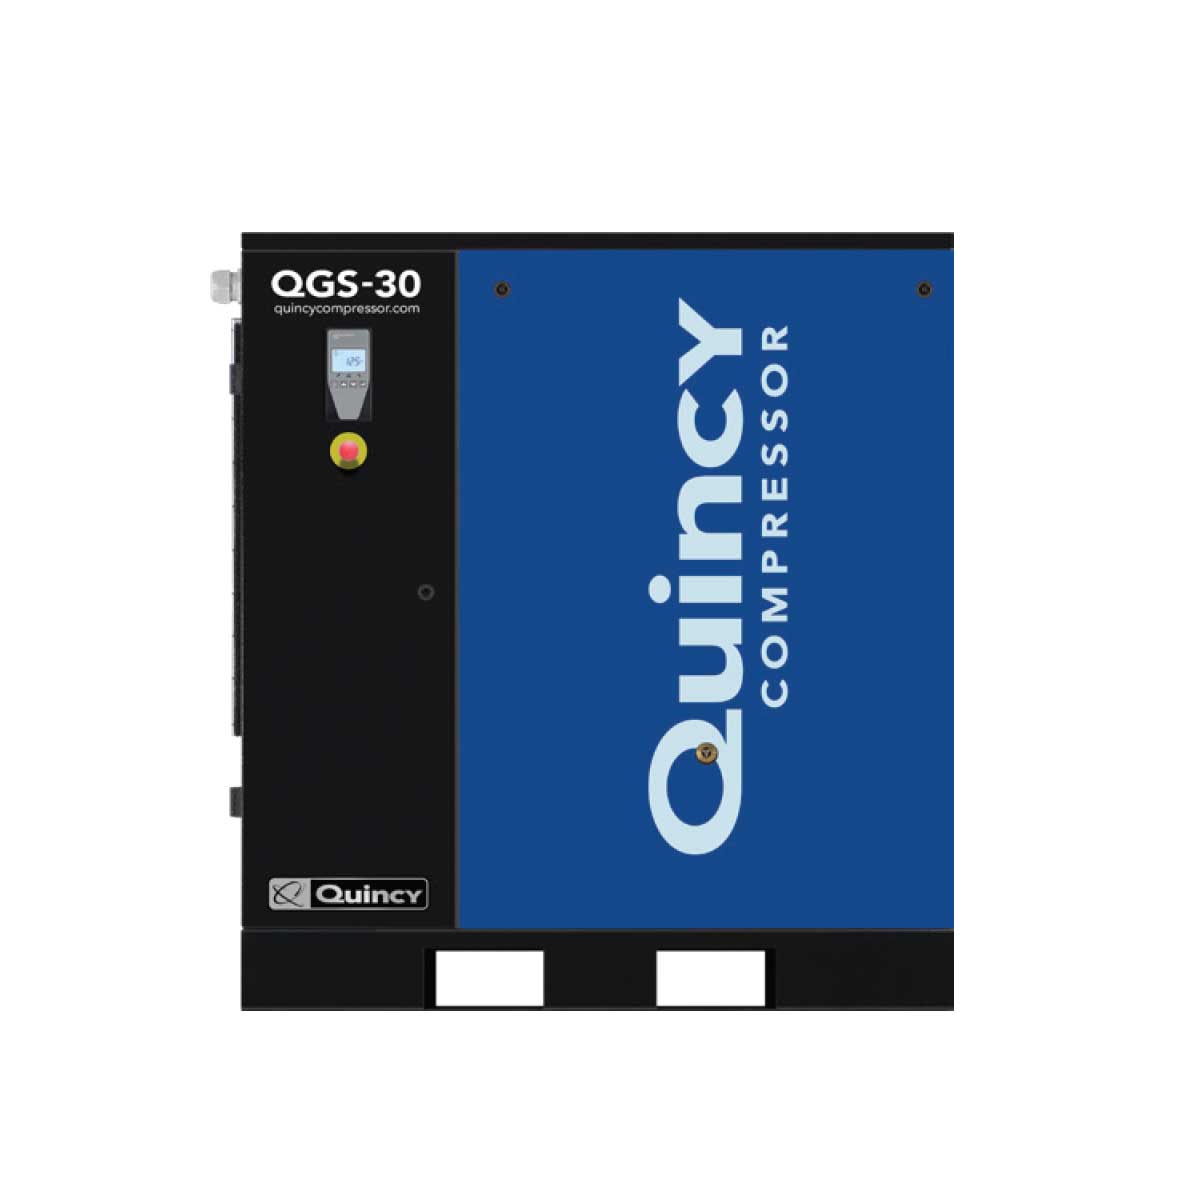 Maximize Efficiency with Quincy QGS 30 BM-3 Rotary Air Compressor